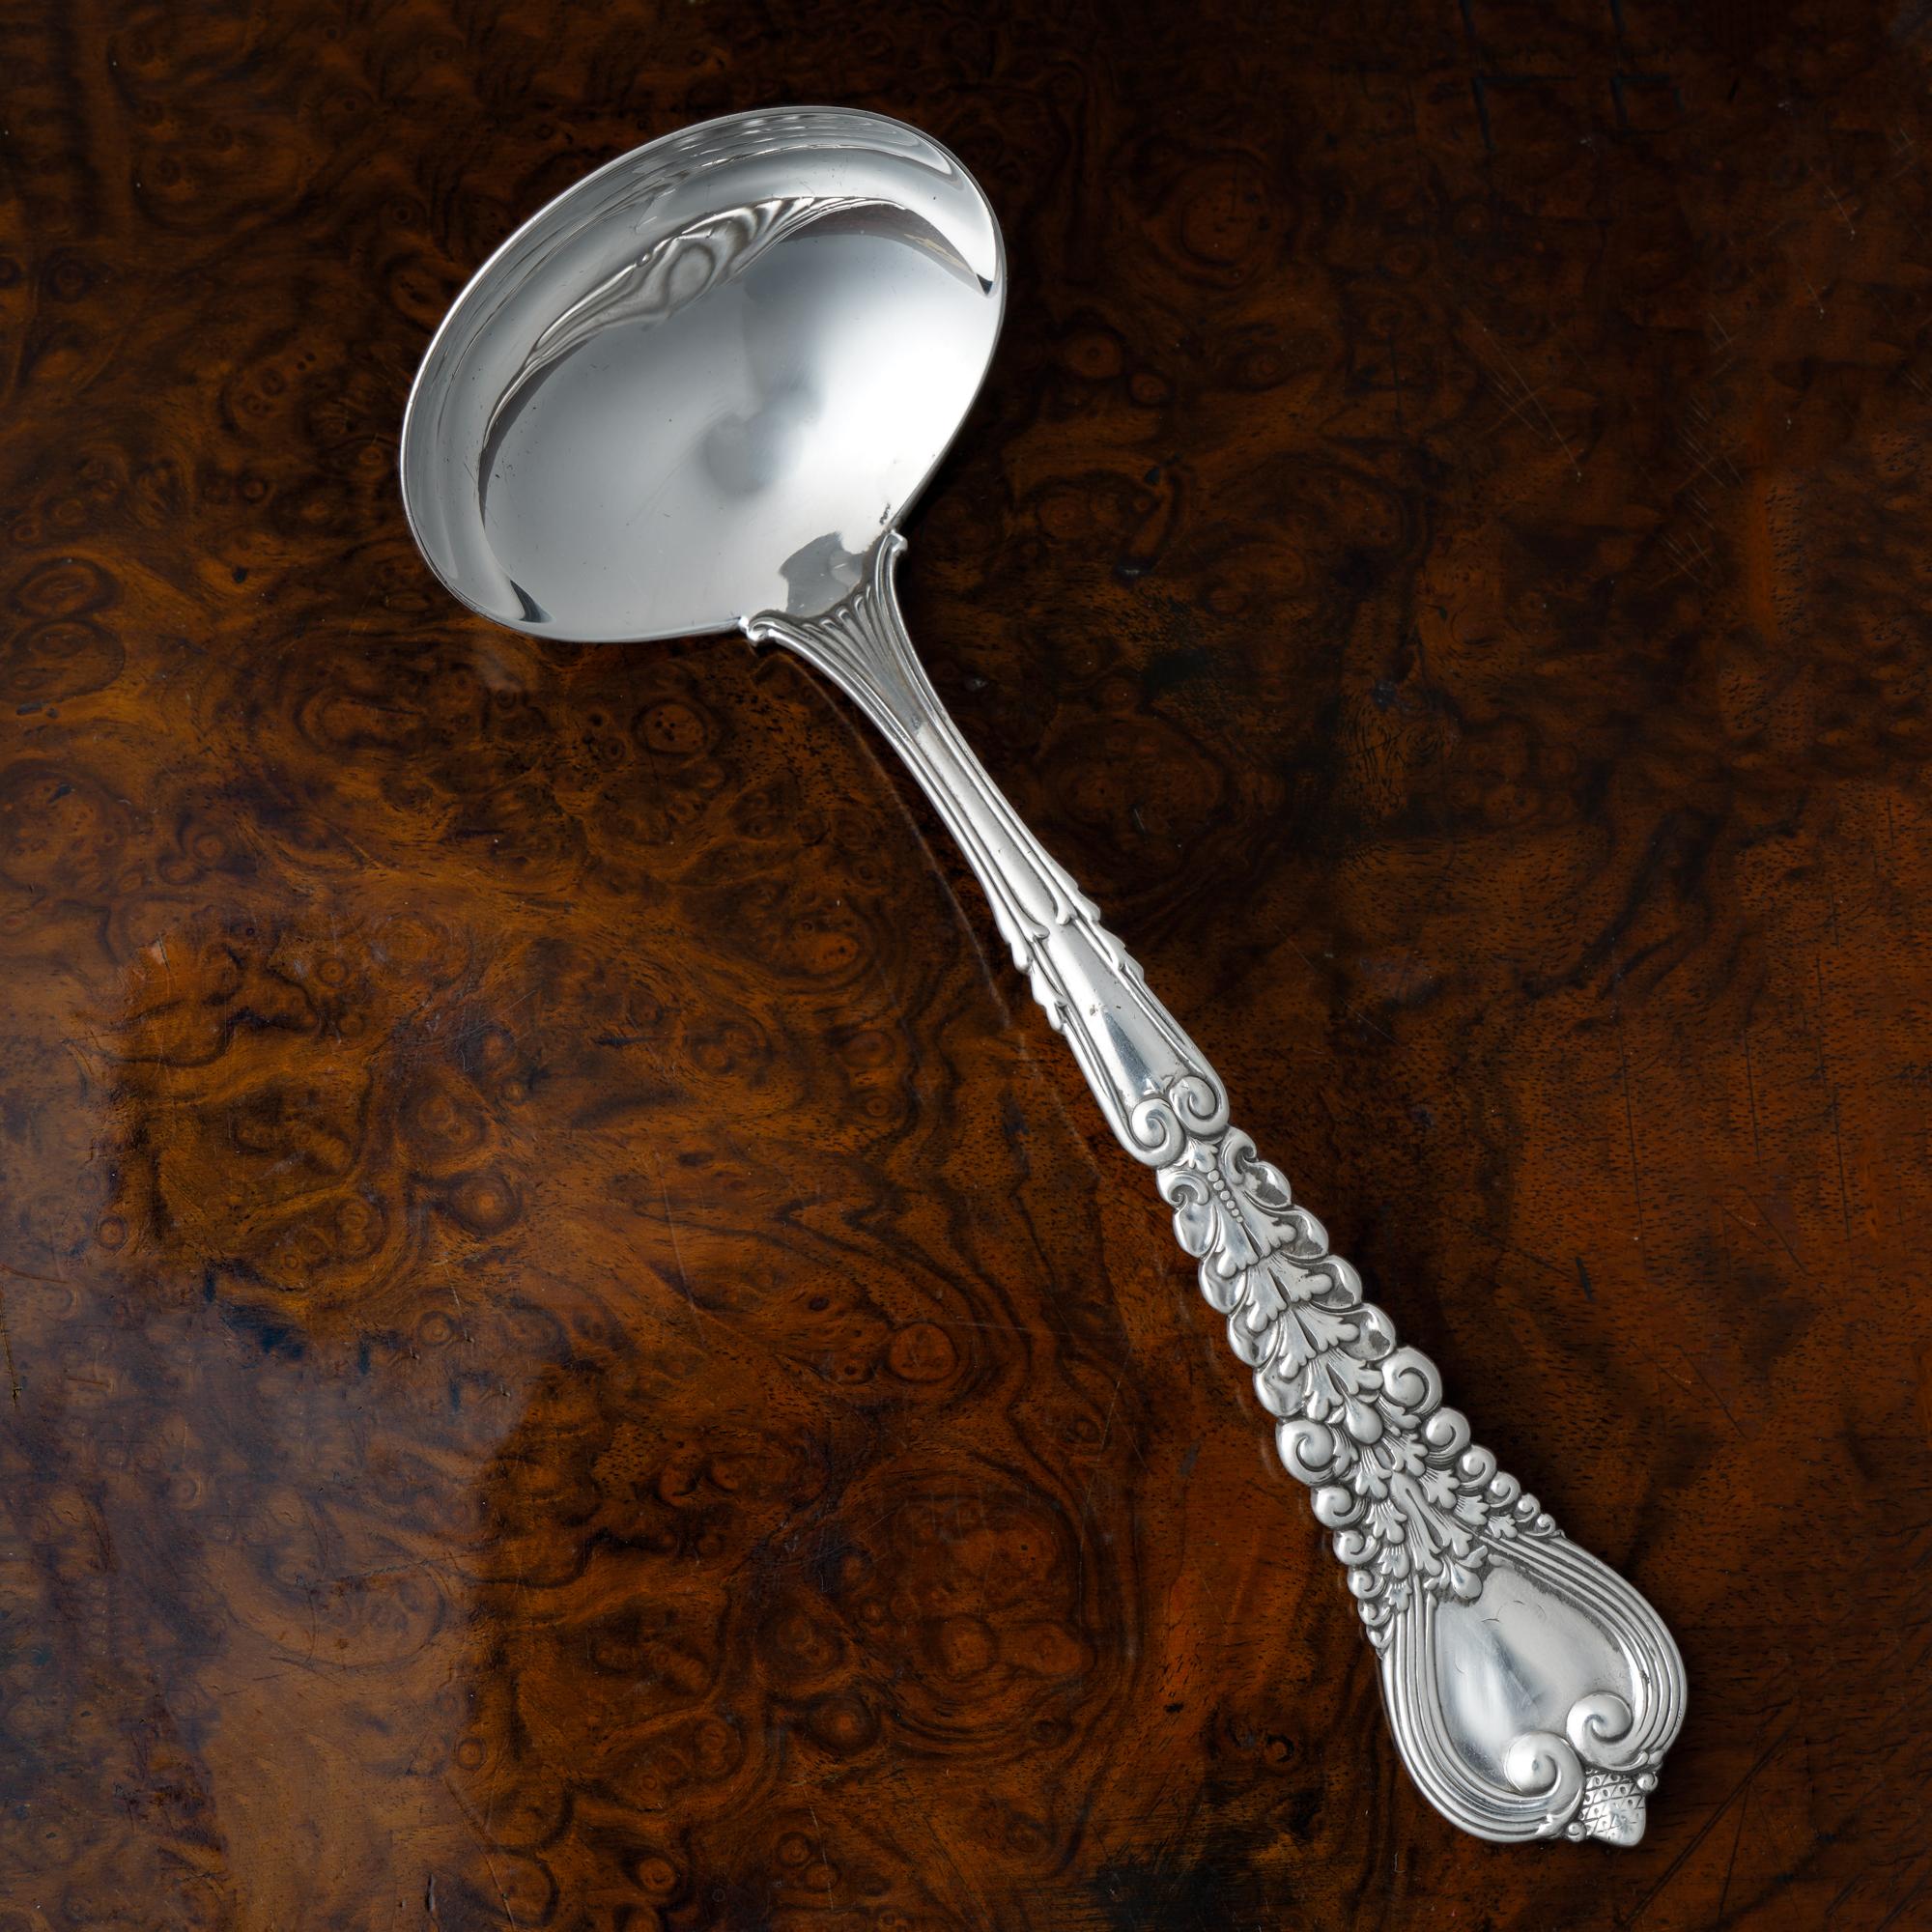 Antique Tiffany & Co. sterling silver Florentine pattern sauce ladle

Maker: Tiffany & Co
Pattern: Designed by Paulding Farnham
Style: Renaissance Revival
Introduced 1900, but the patent application not filed until May 9, 1904, issued June 7,